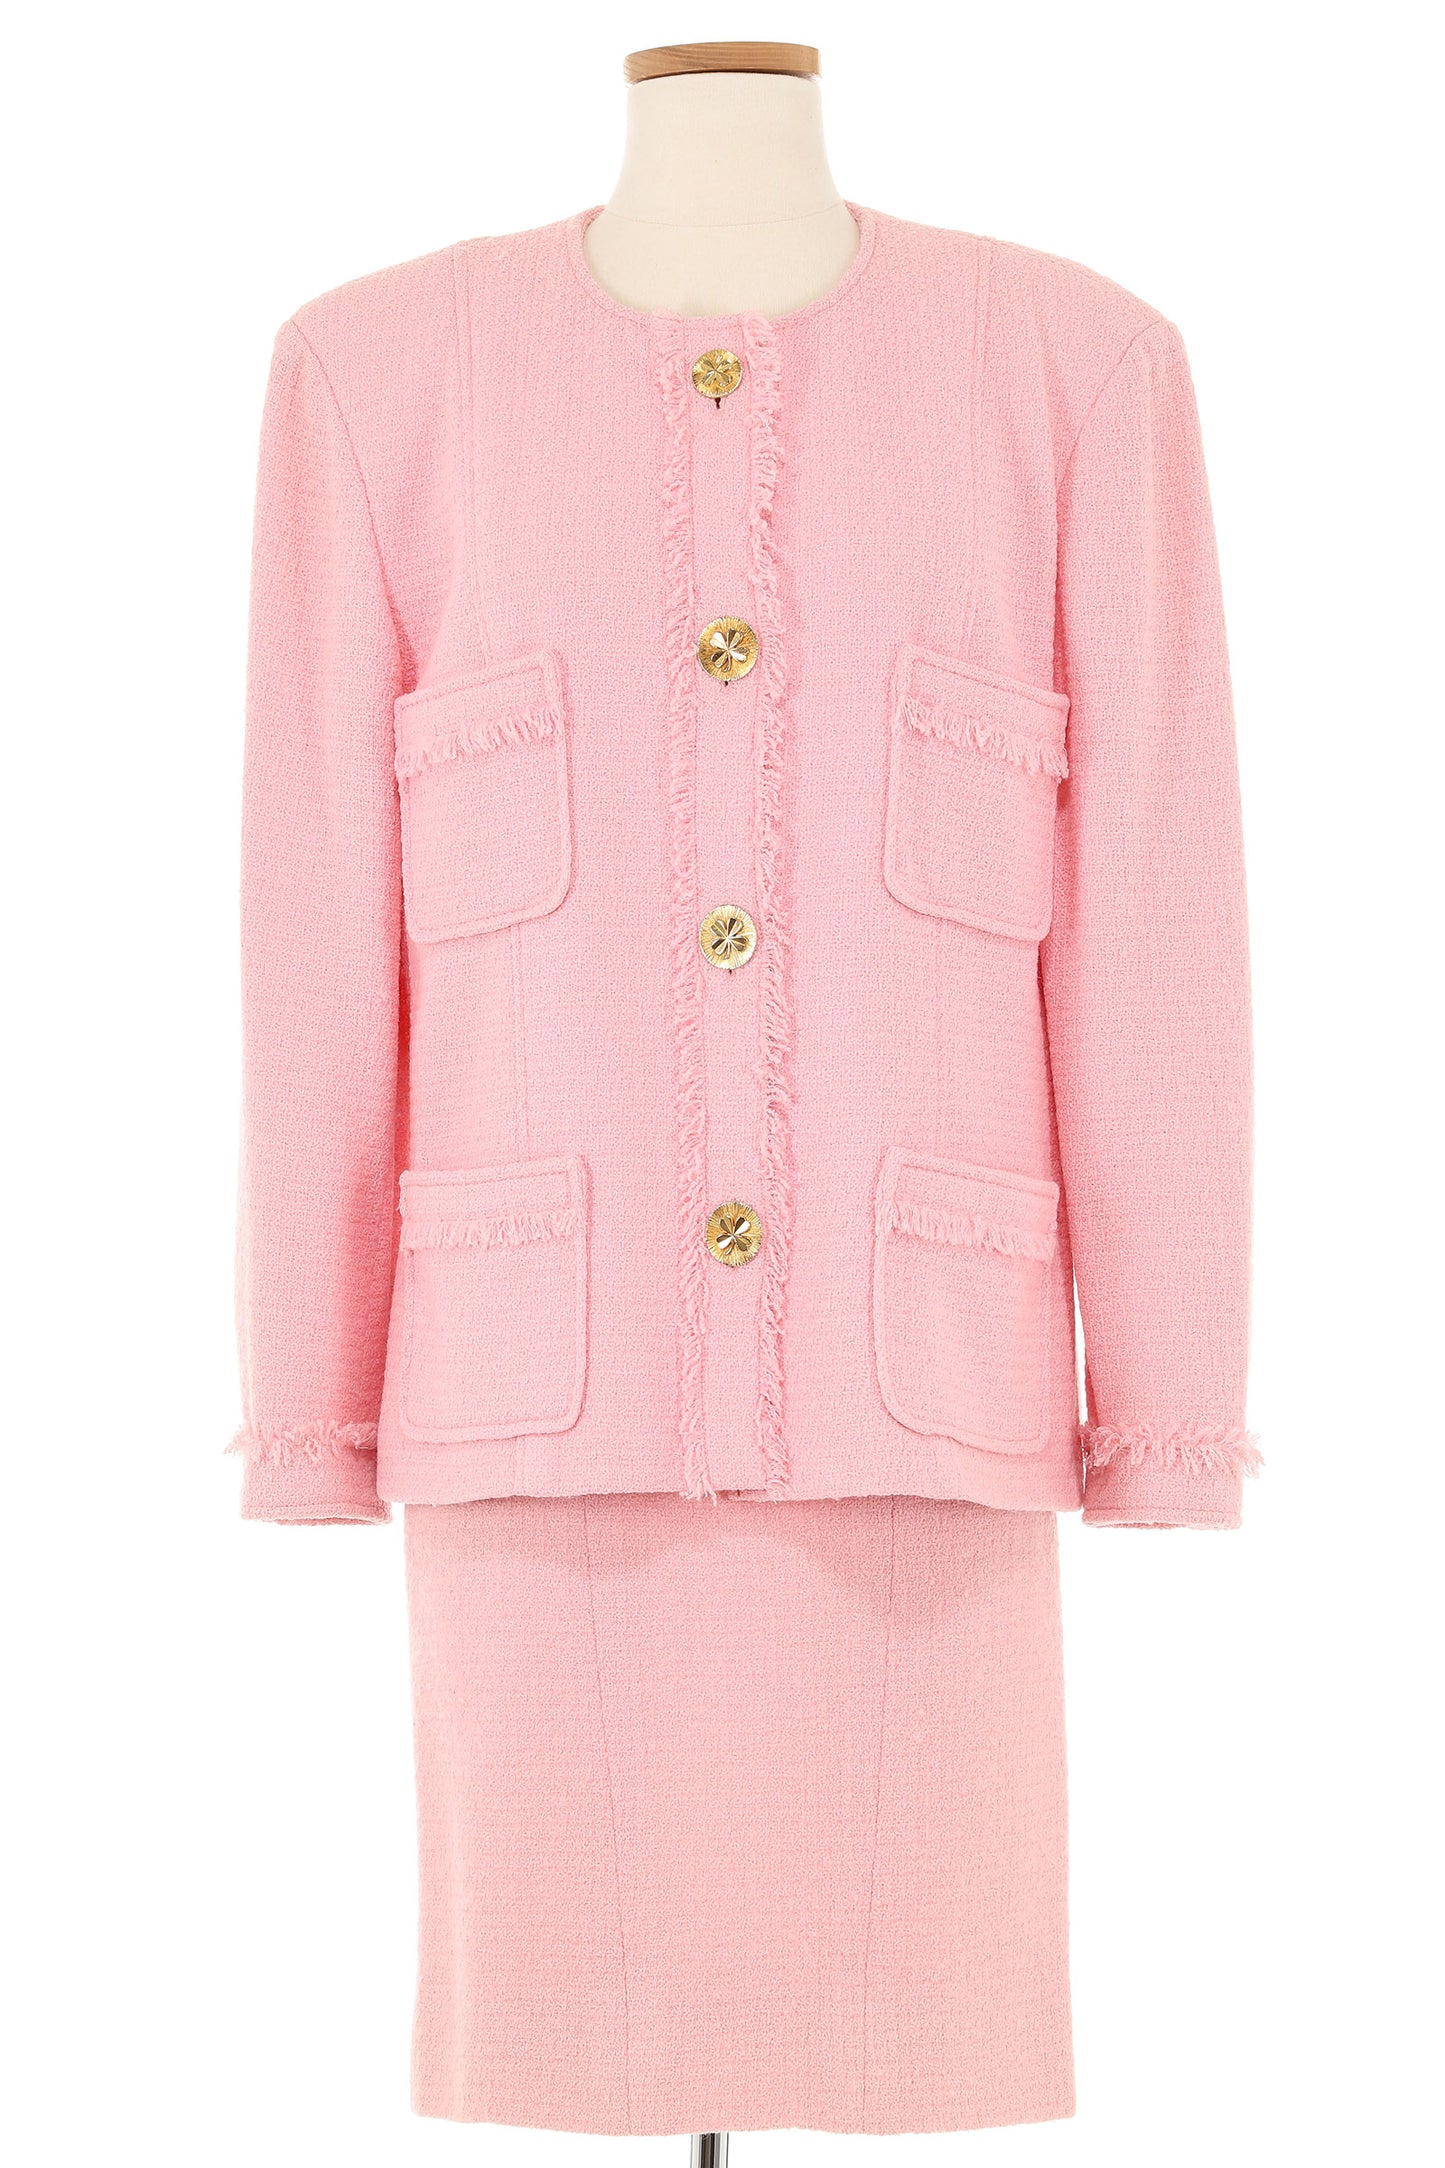 Chanel Fall 1990 Pink Skirt Suit with Clover Buttons